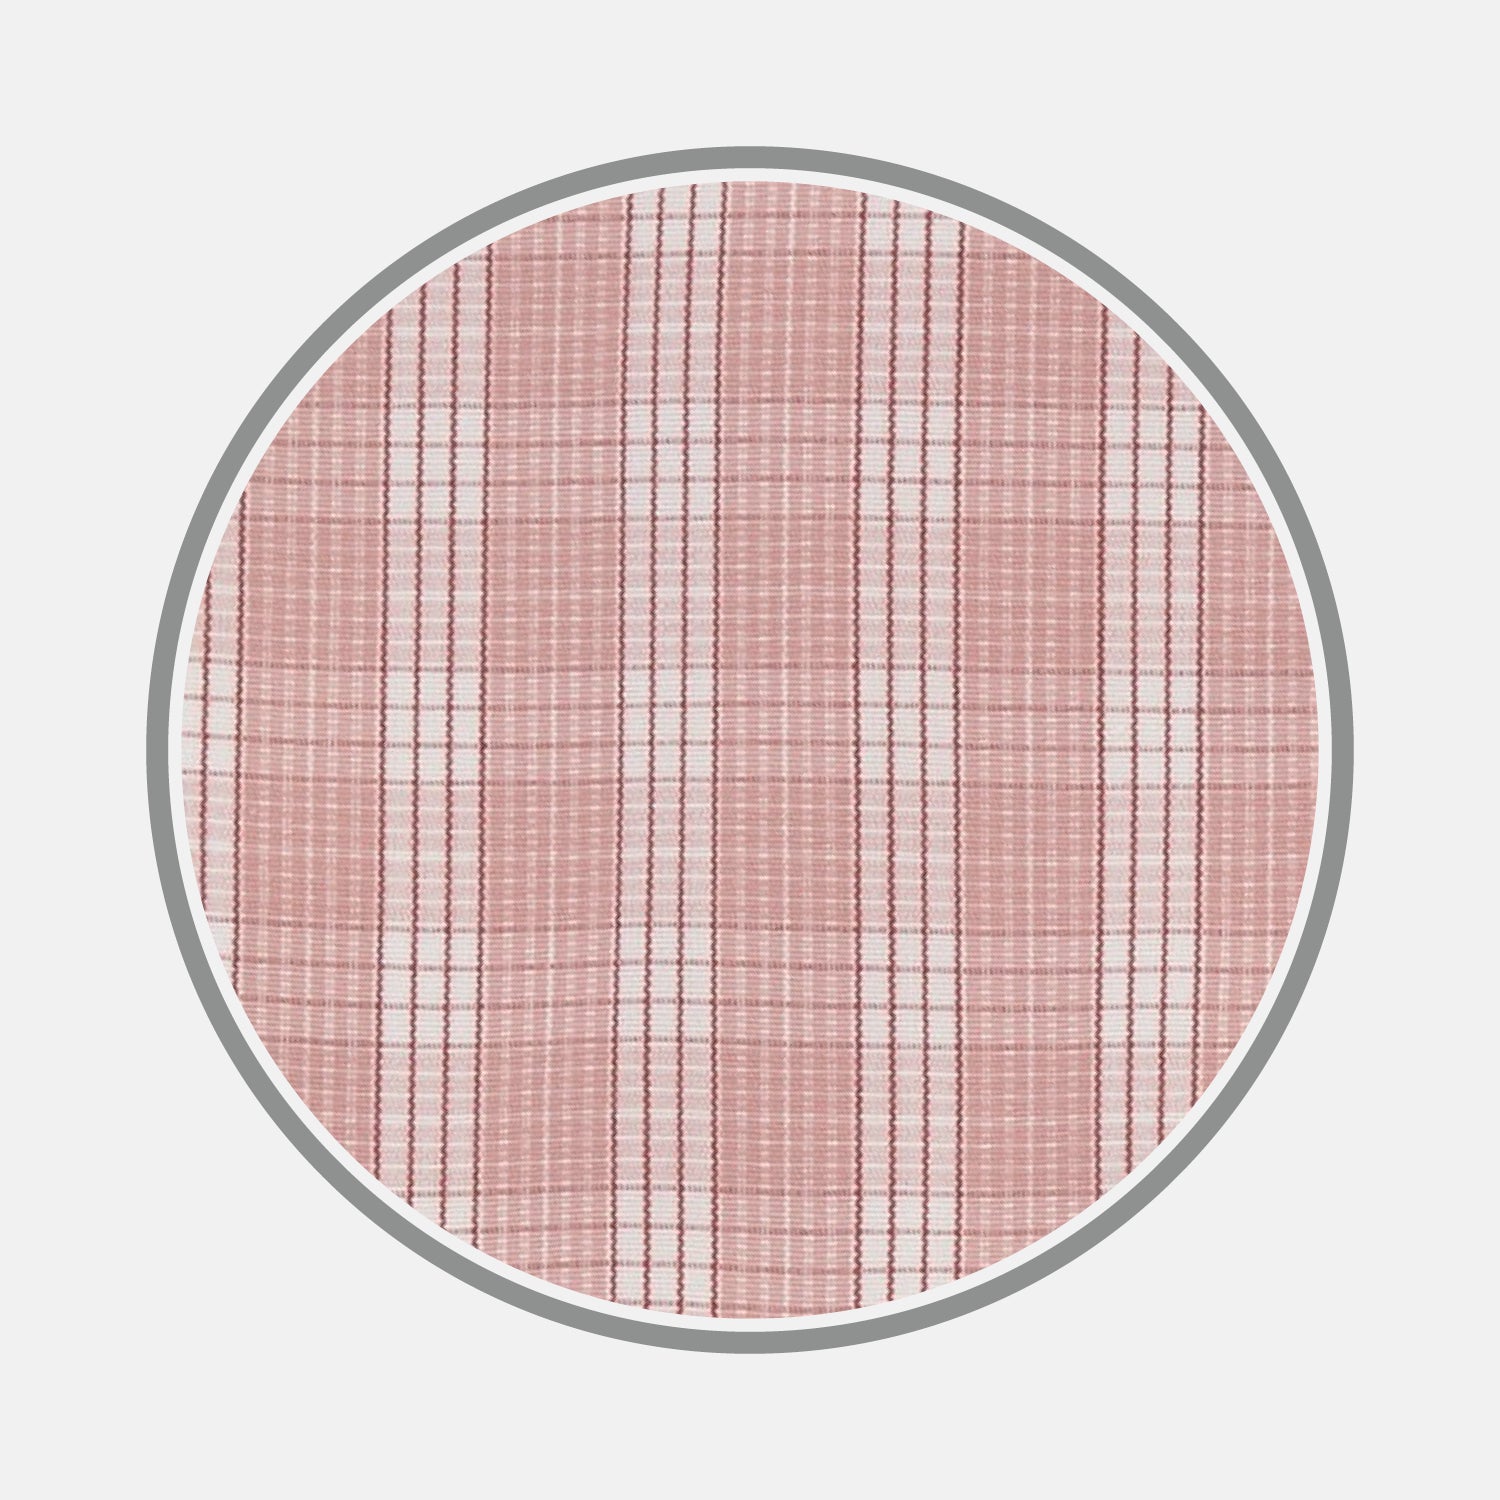 Pink and White Bold Check Cotton Fabric